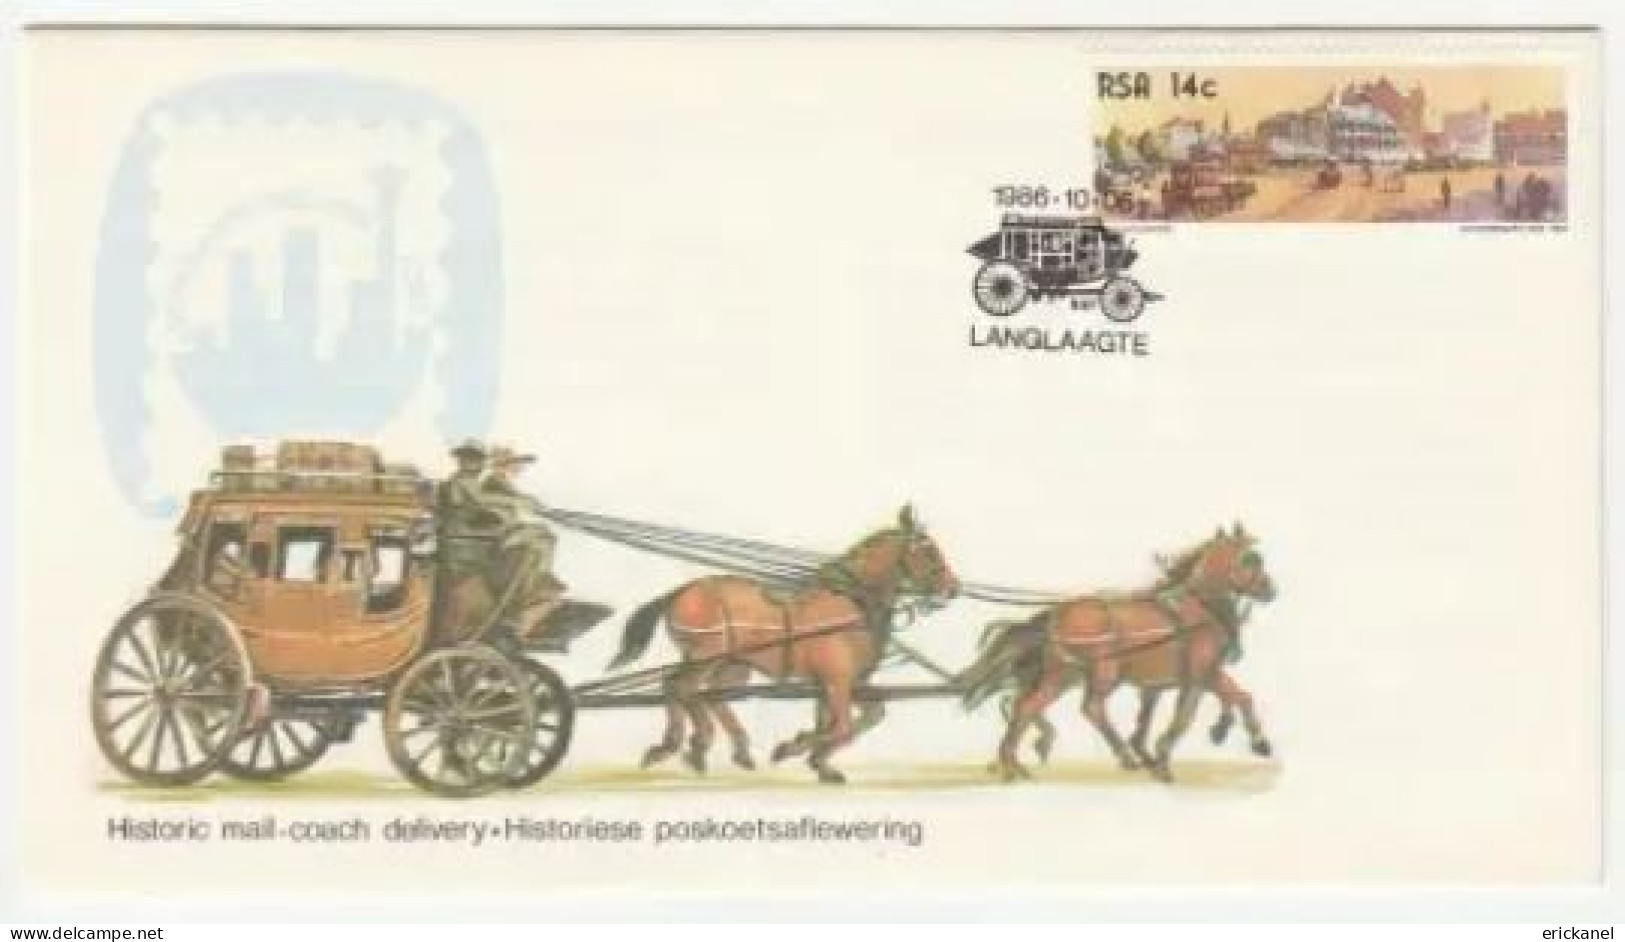 1986 SOUTH AFRICA Johannesburg 100 Historic Mail-coach Delivery Commemorative Cover - FDC